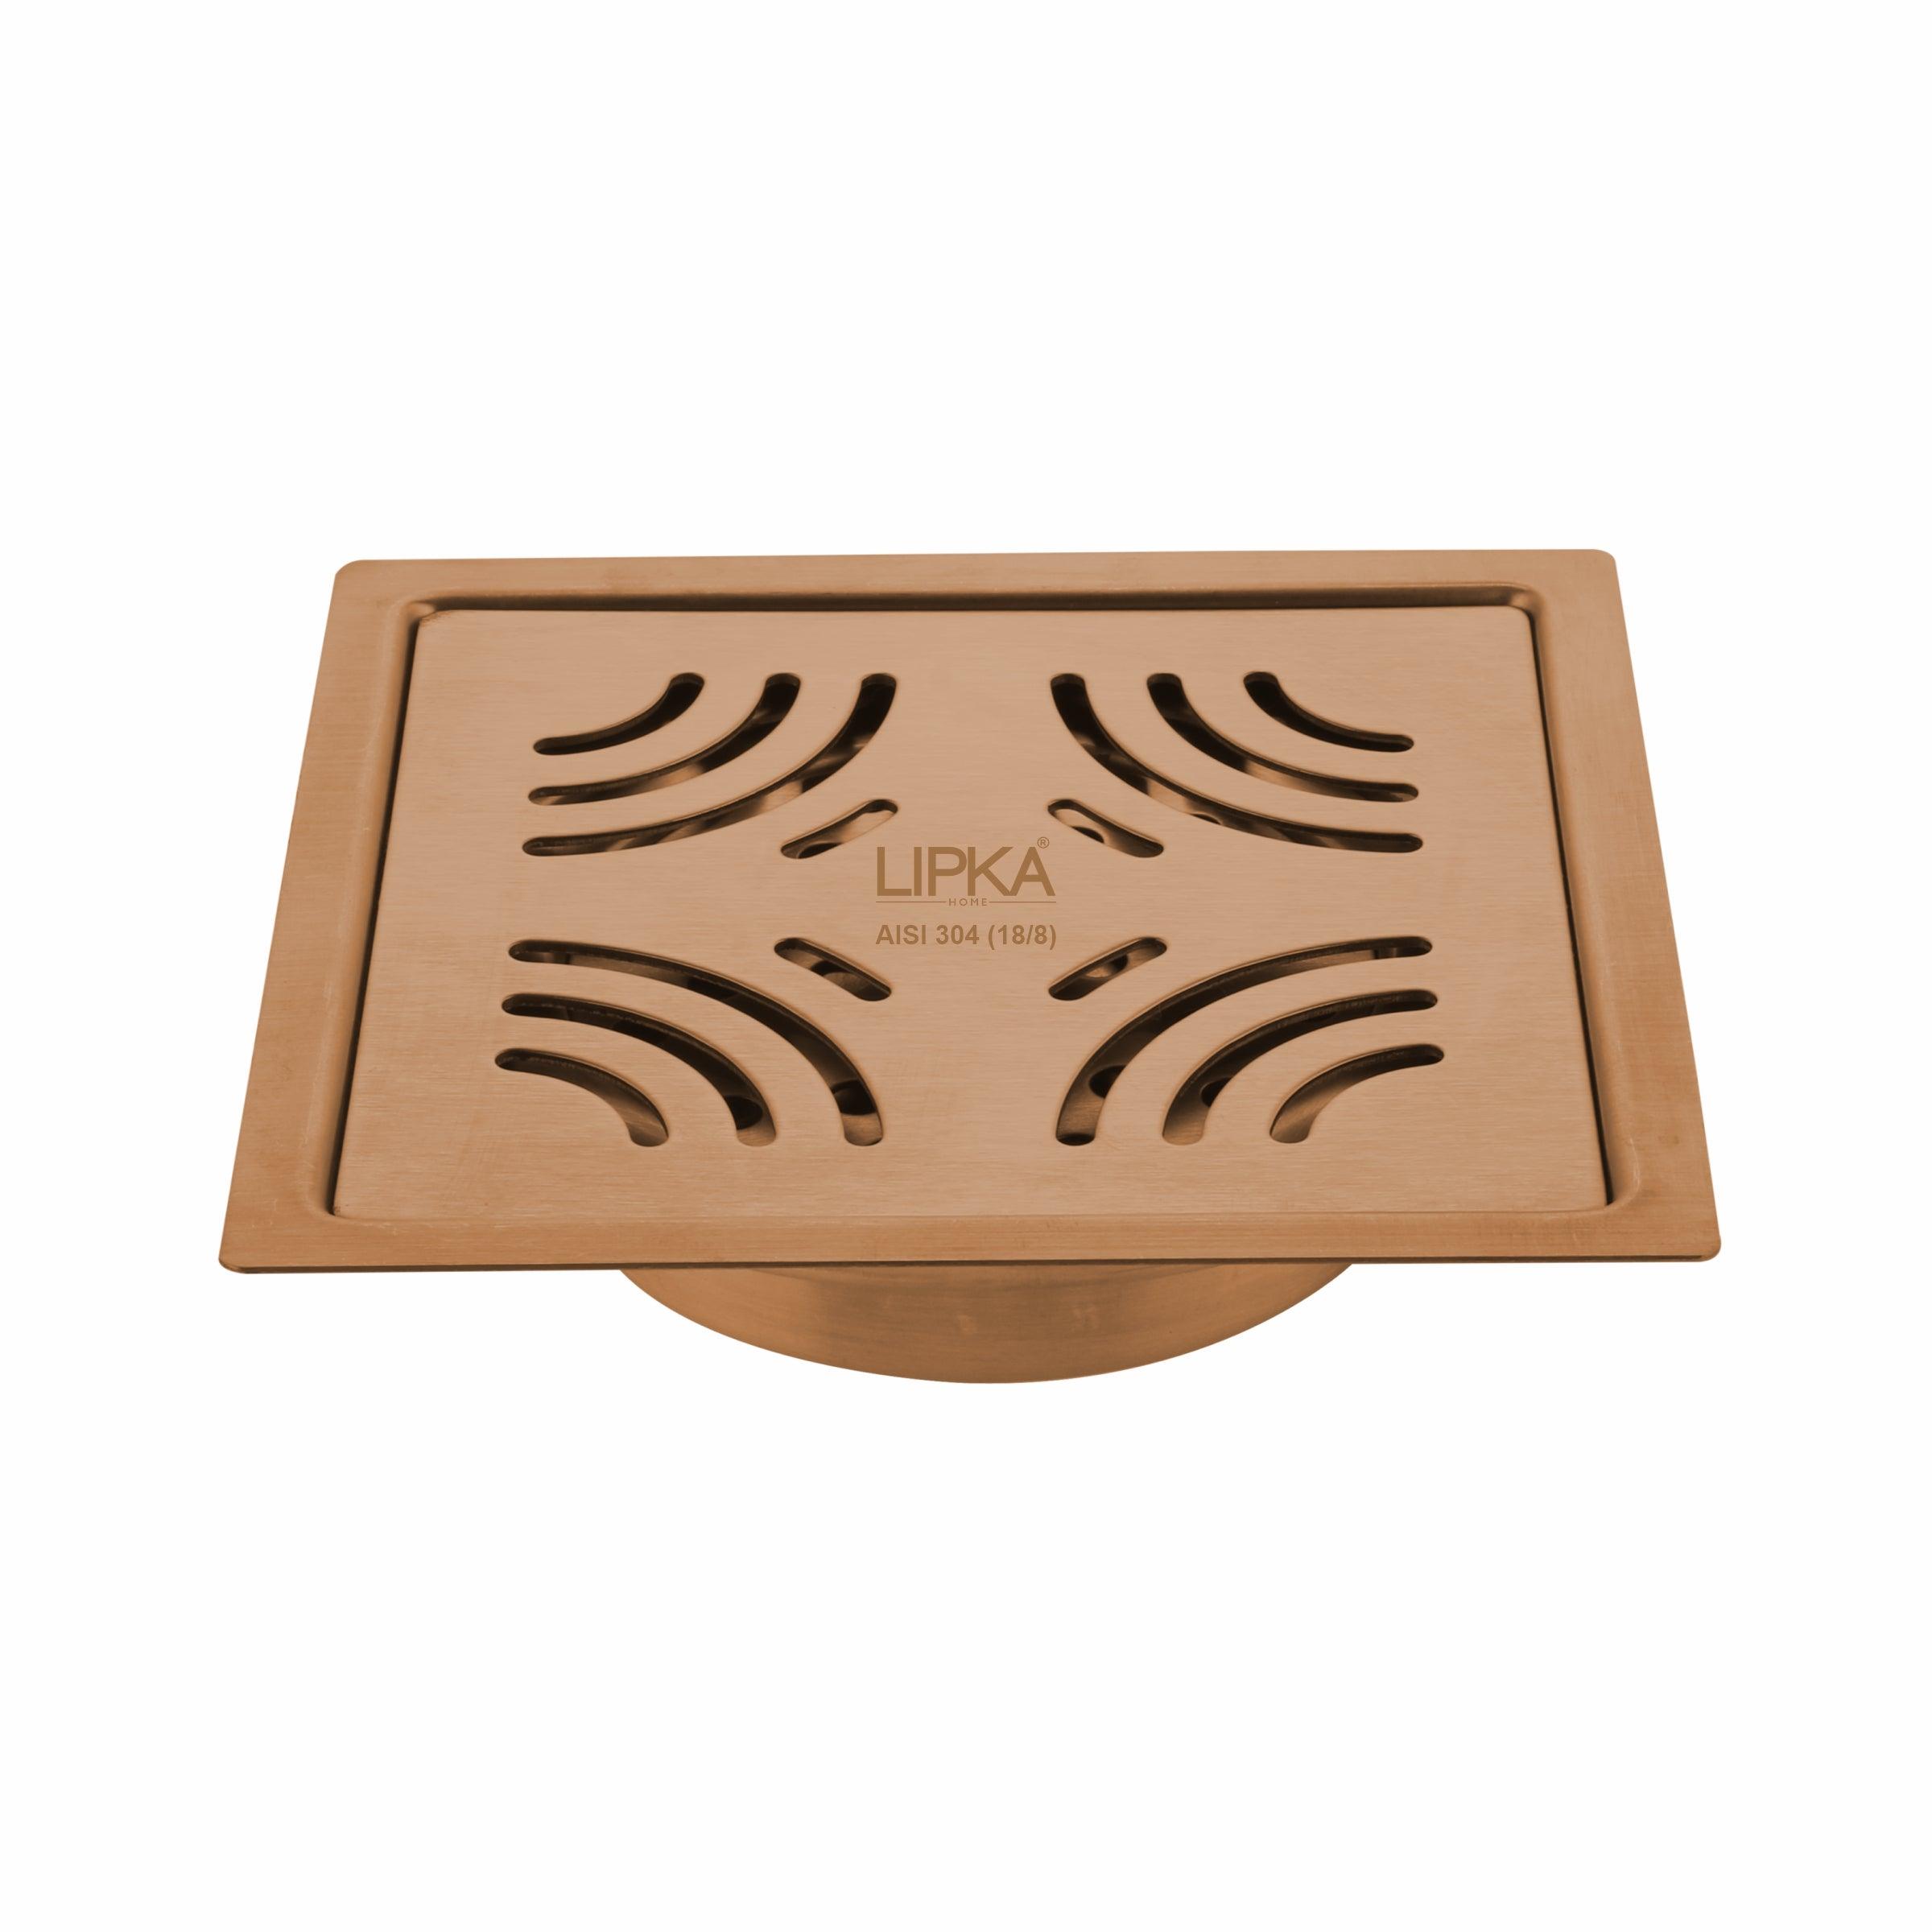 Purple Exclusive Square Flat Cut Floor Drain in Antique Copper PVD Coating (5 x 5 Inches) with Cockroach Trap